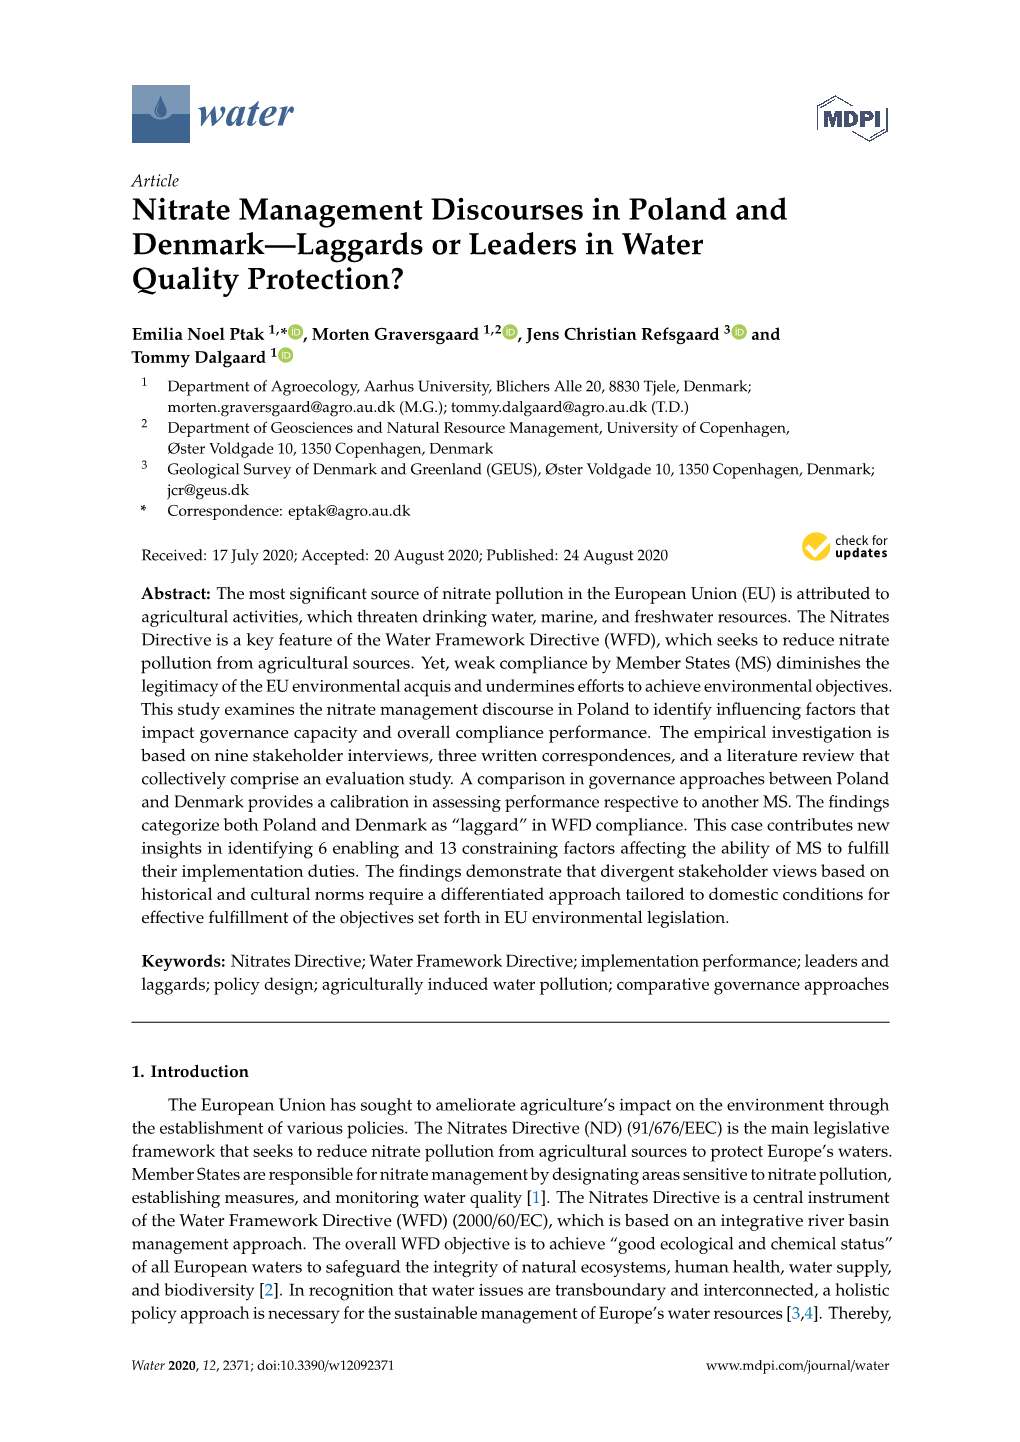 Nitrate Management Discourses in Poland and Denmark—Laggards Or Leaders in Water Quality Protection?